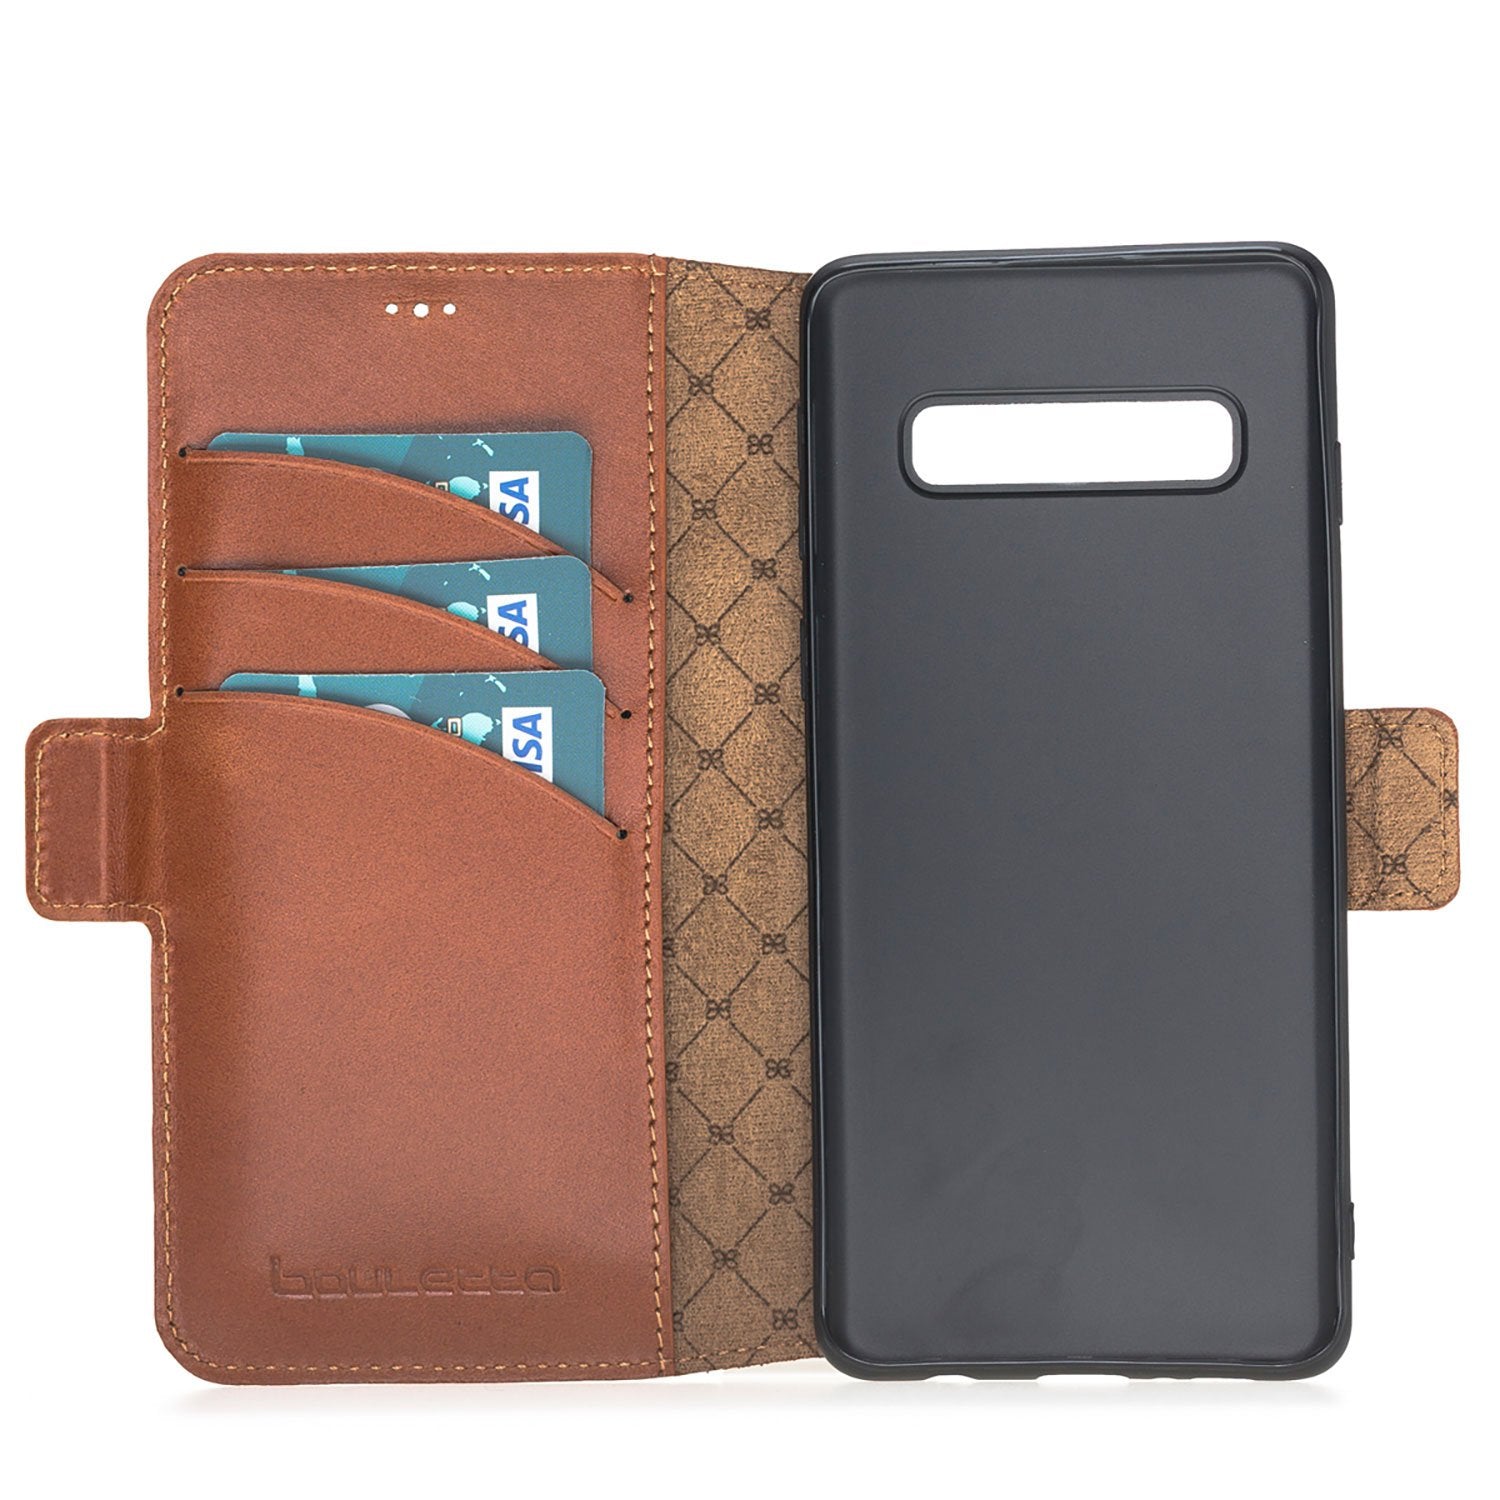 Wallet Leather Case New Edition with ID slot for Samsung S10- Rustic Tan with Effect